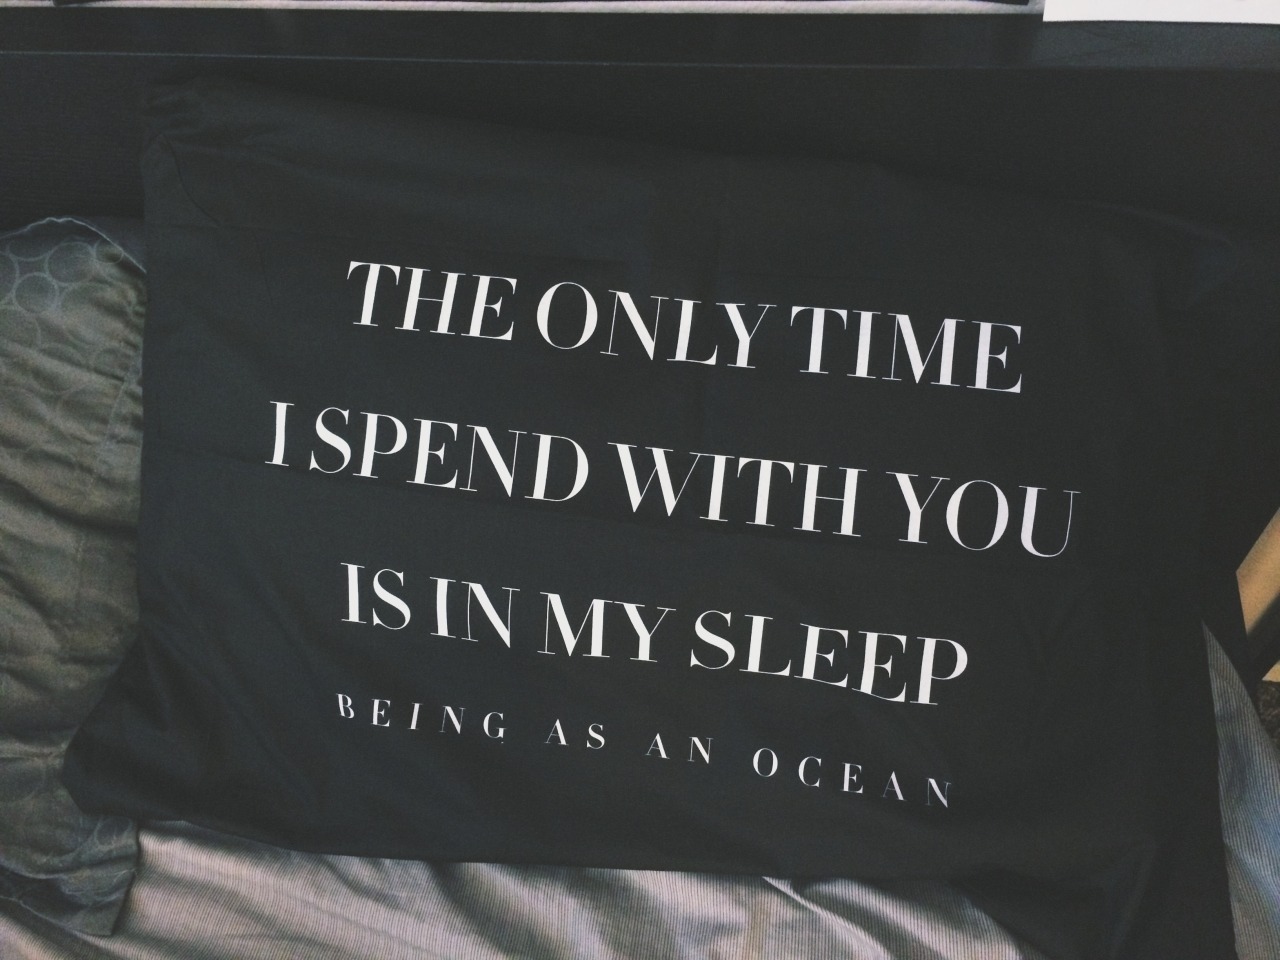 mis0mania:
“ mis0mania:
“ my baao pillow came in the mail c:
” ”